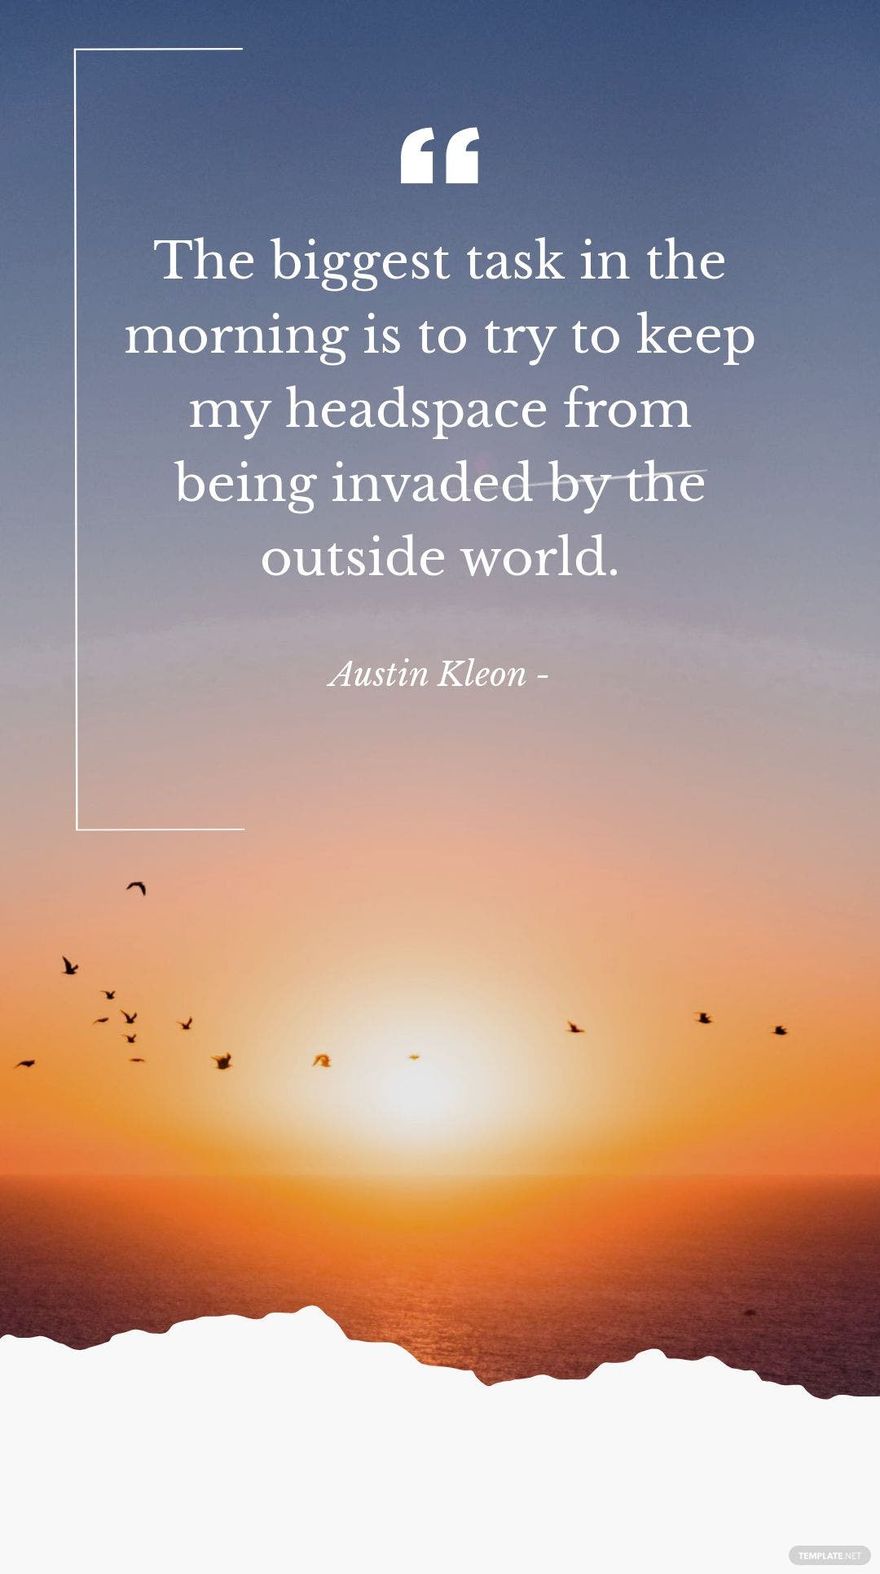 Austin Kleon - The biggest task in the morning is to try to keep my headspace from being invaded by the outside world.